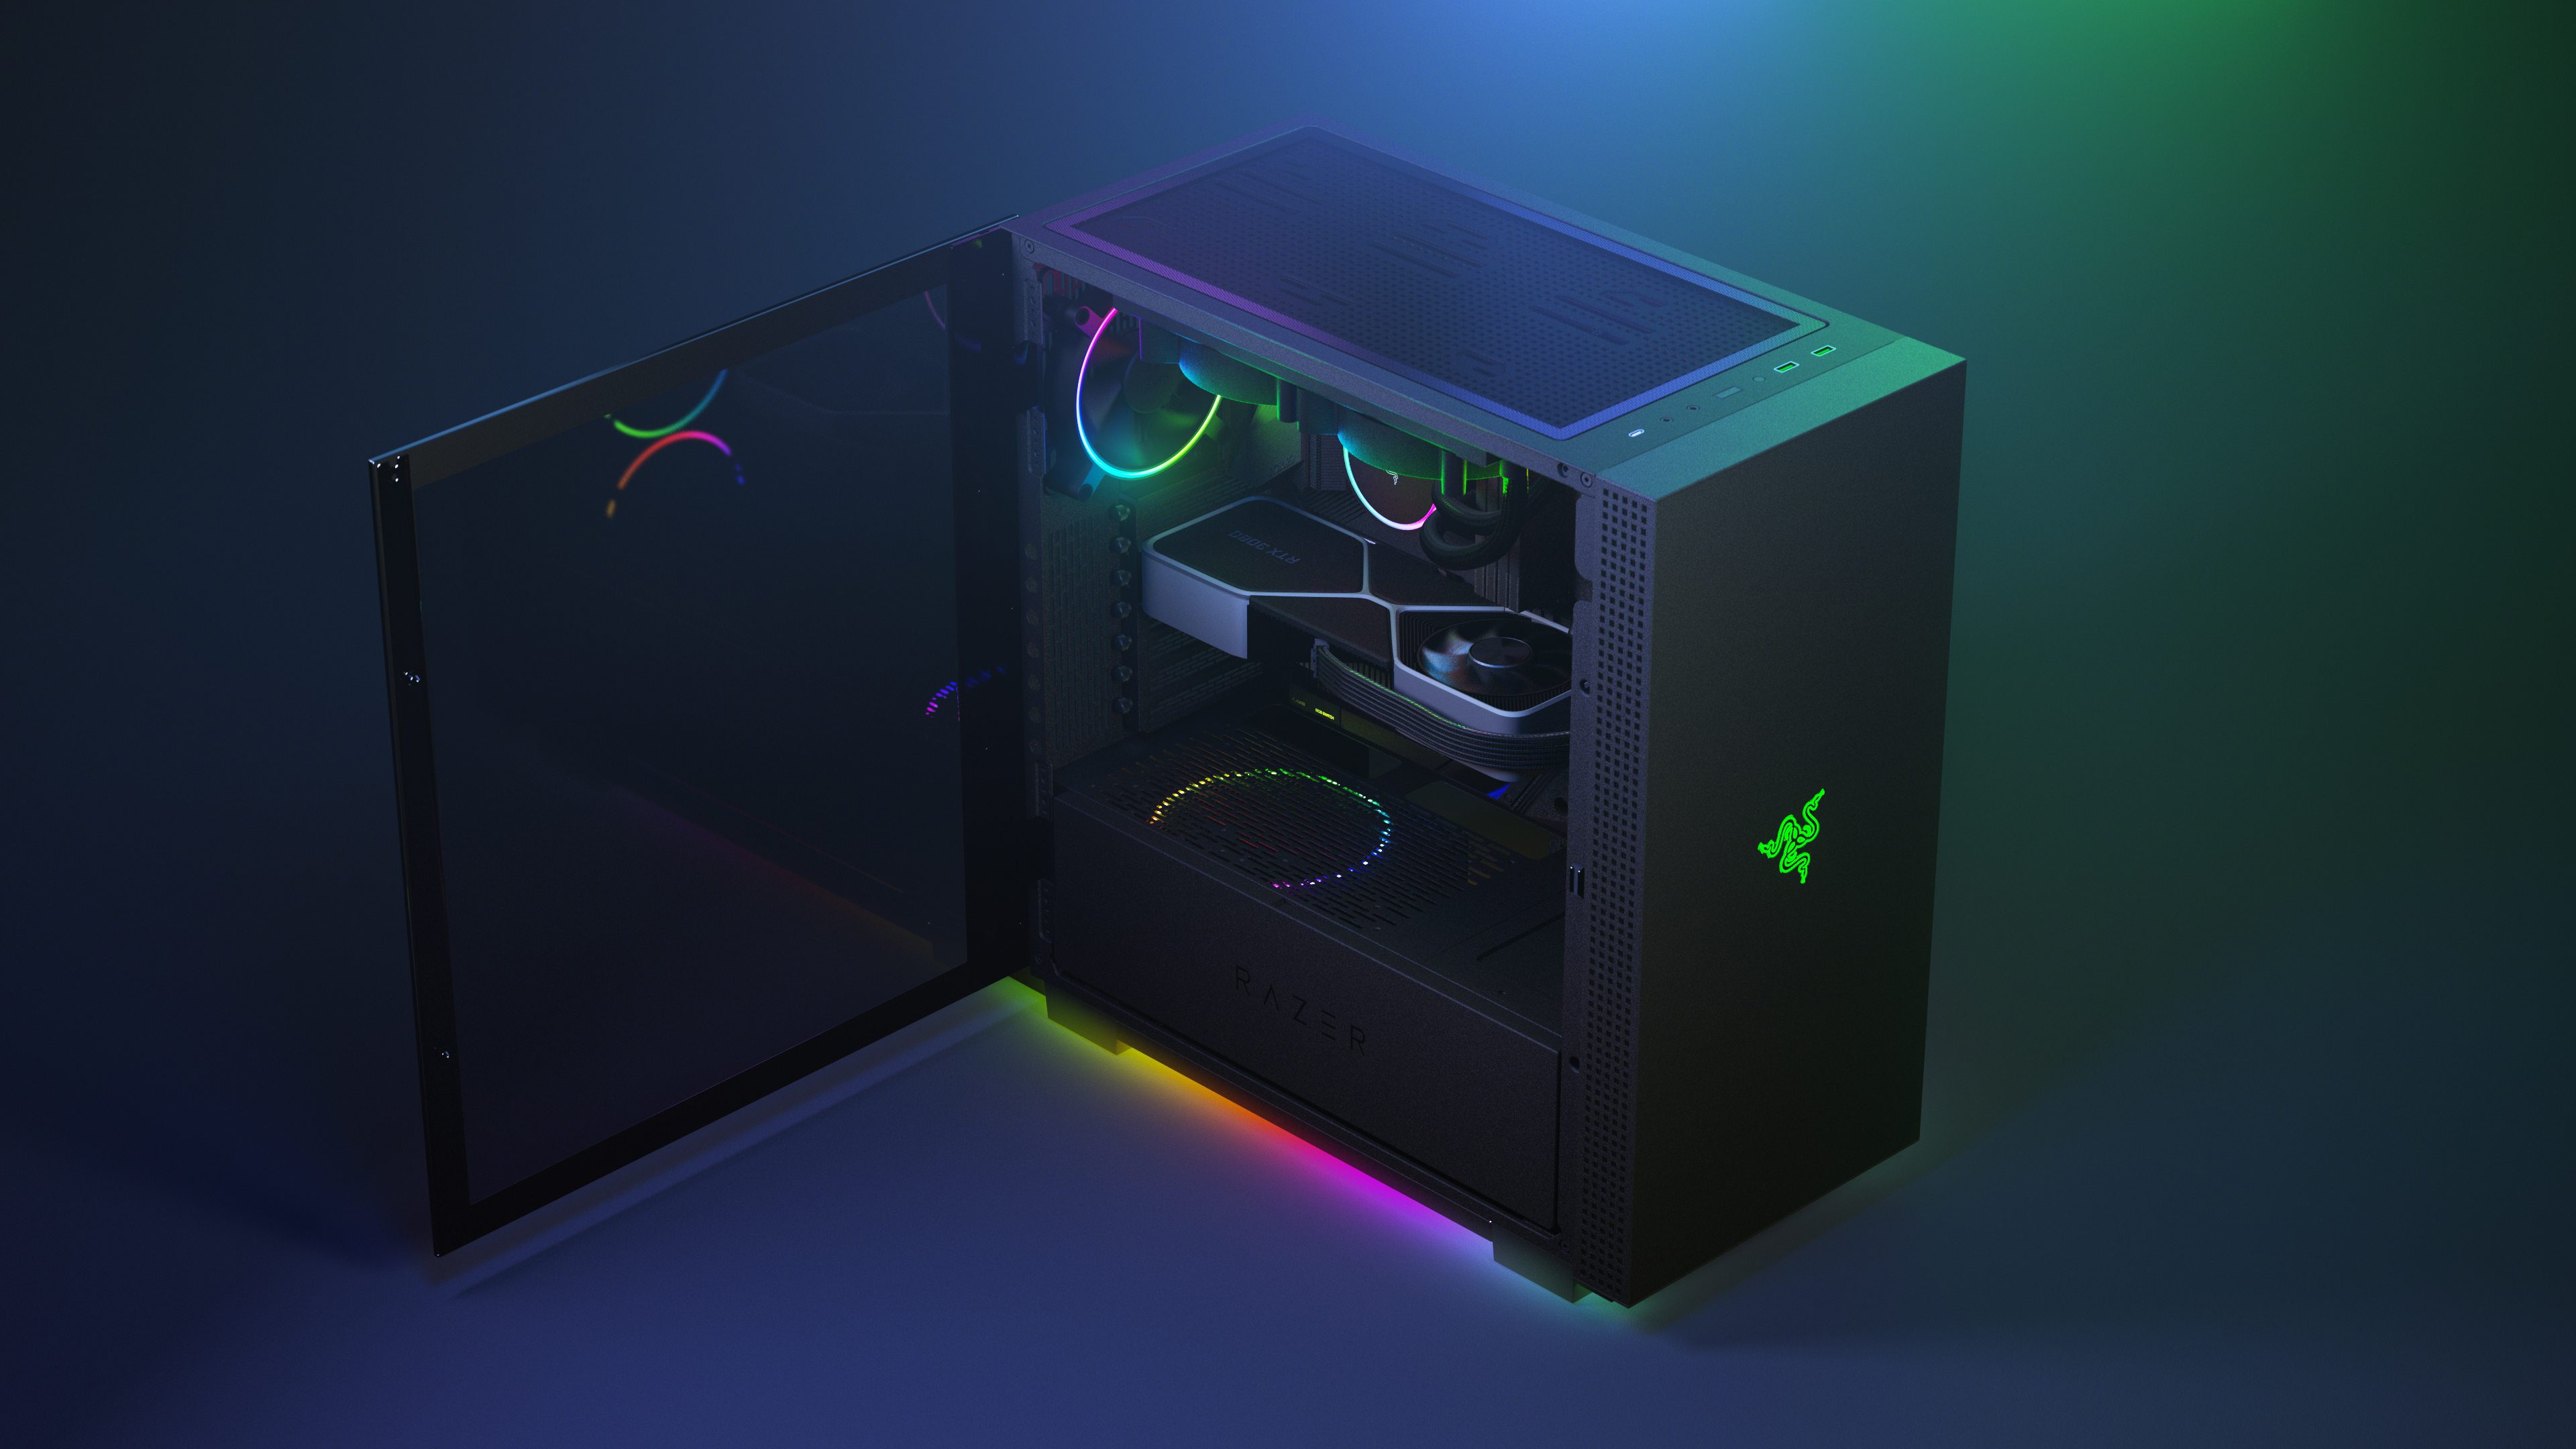  Razer unleashes new PC components in bid to beat Corsair to your gaming PC 